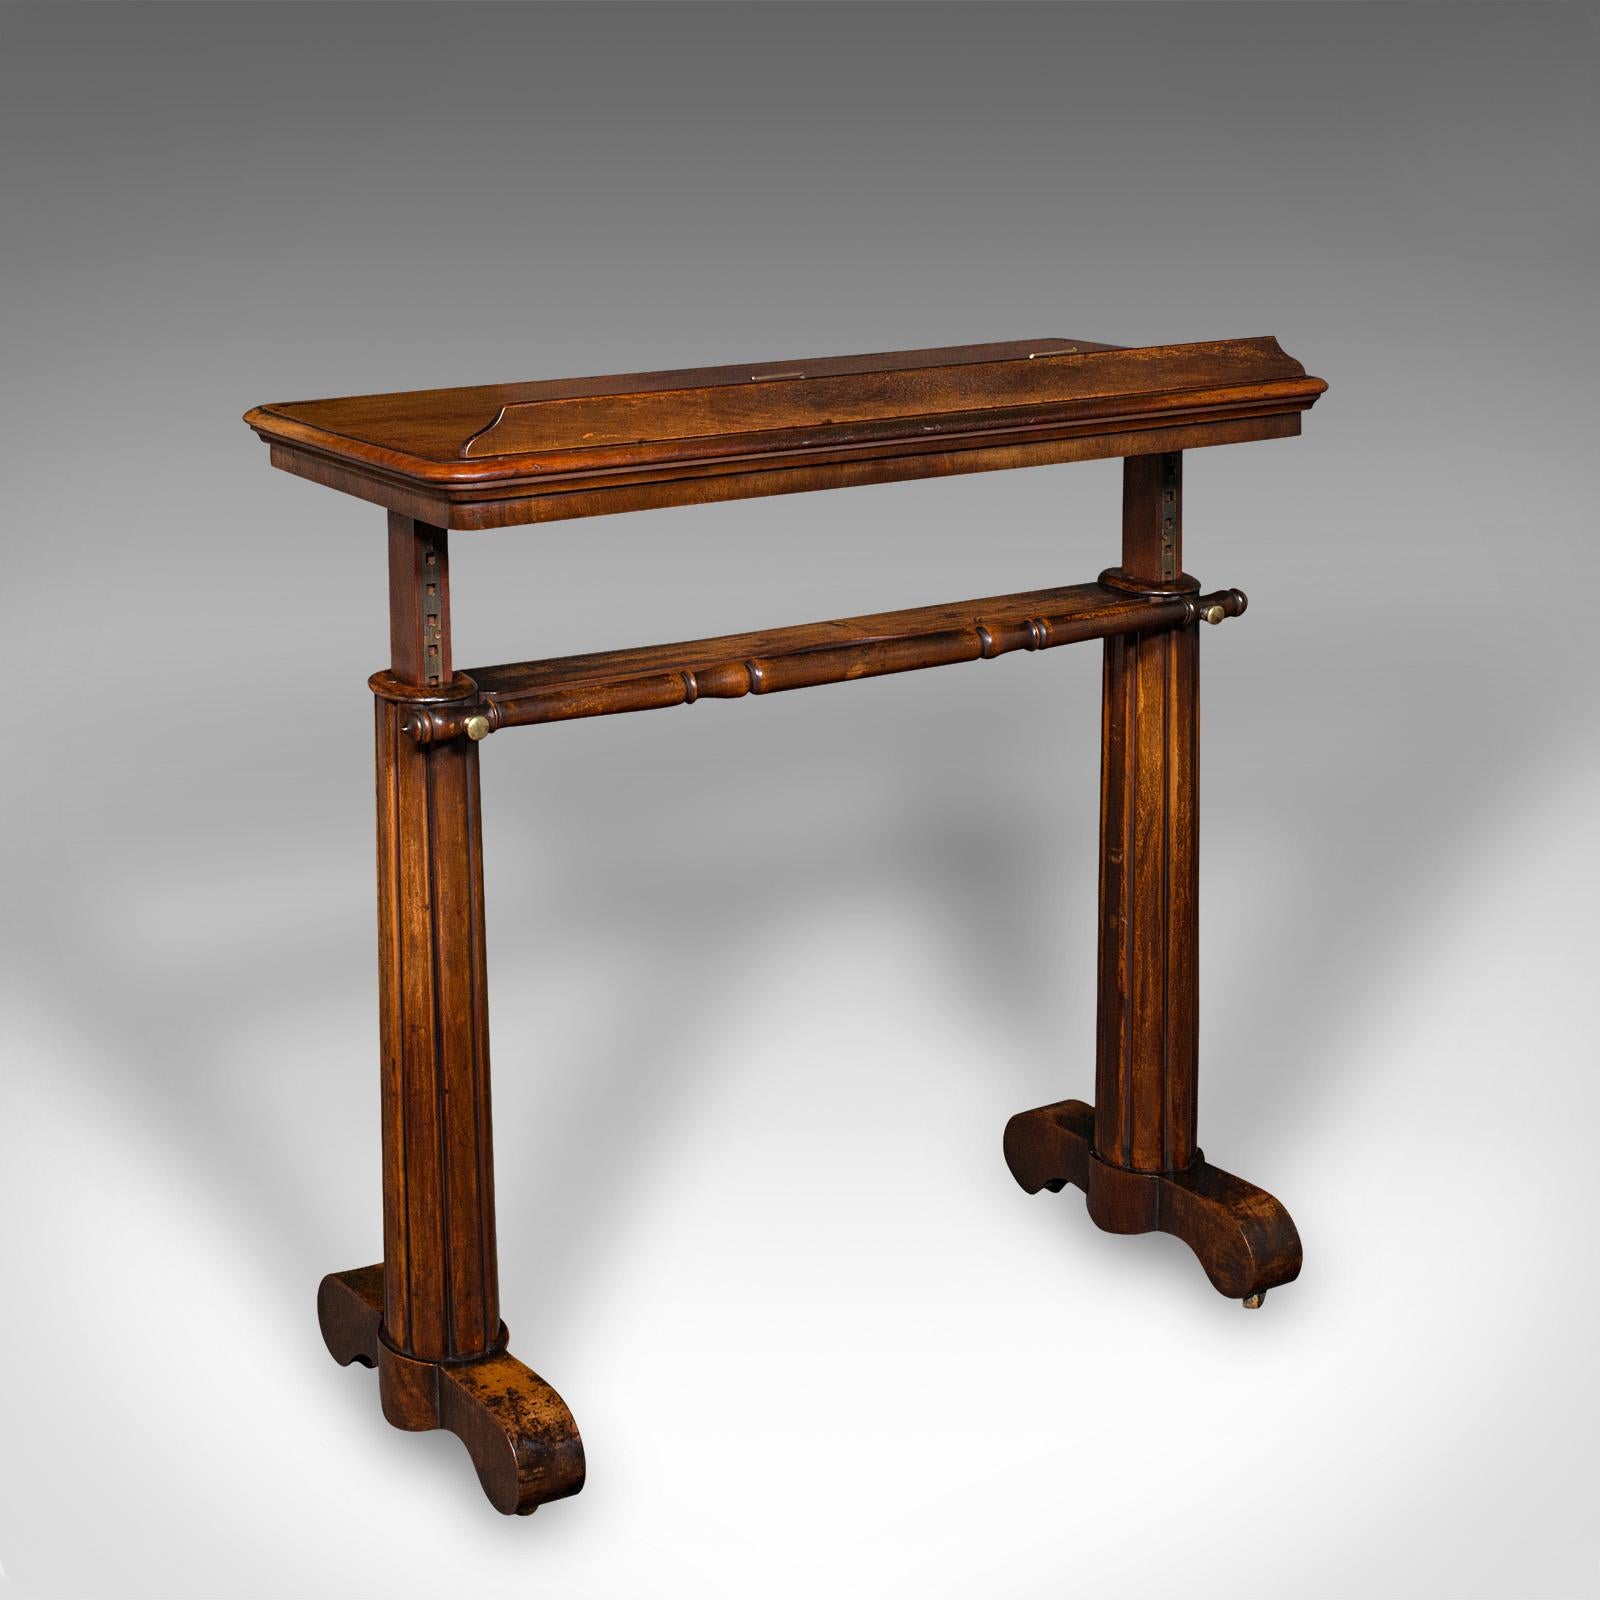 This is an antique adjustable reading table. An English, mahogany event lectern or recital stand, dating to the William IV period, circa 1835.

Exceptional and fascinating reading table of the finest quality
Displays a desirable aged patina and